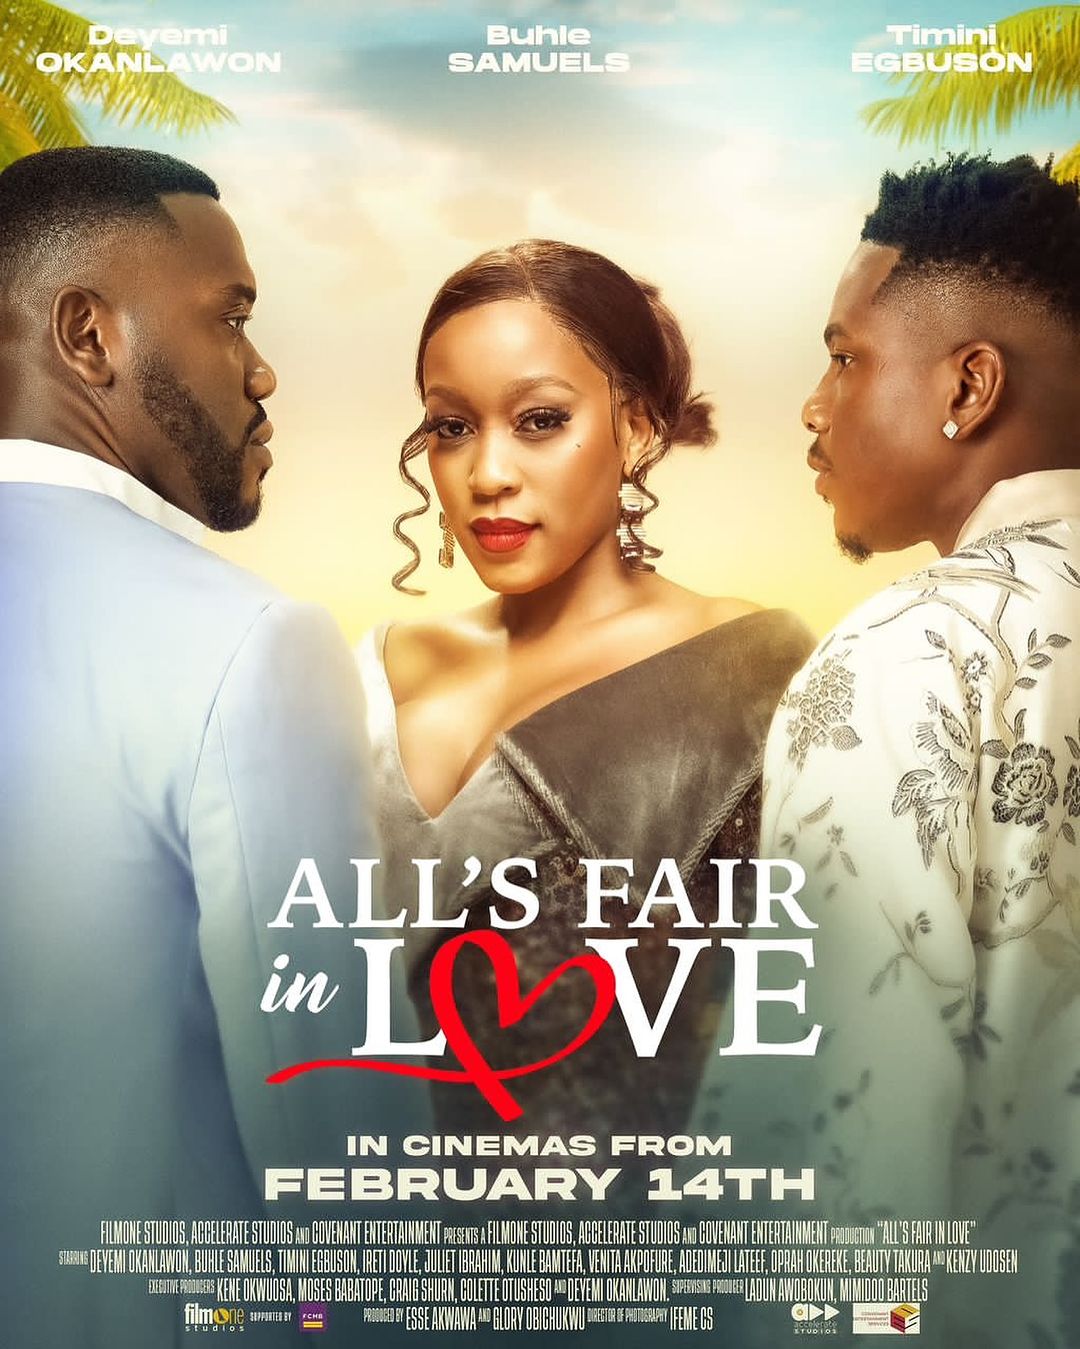 All’s Fair In Love Hits N90 Million In Ticket Sales | Fab.ng